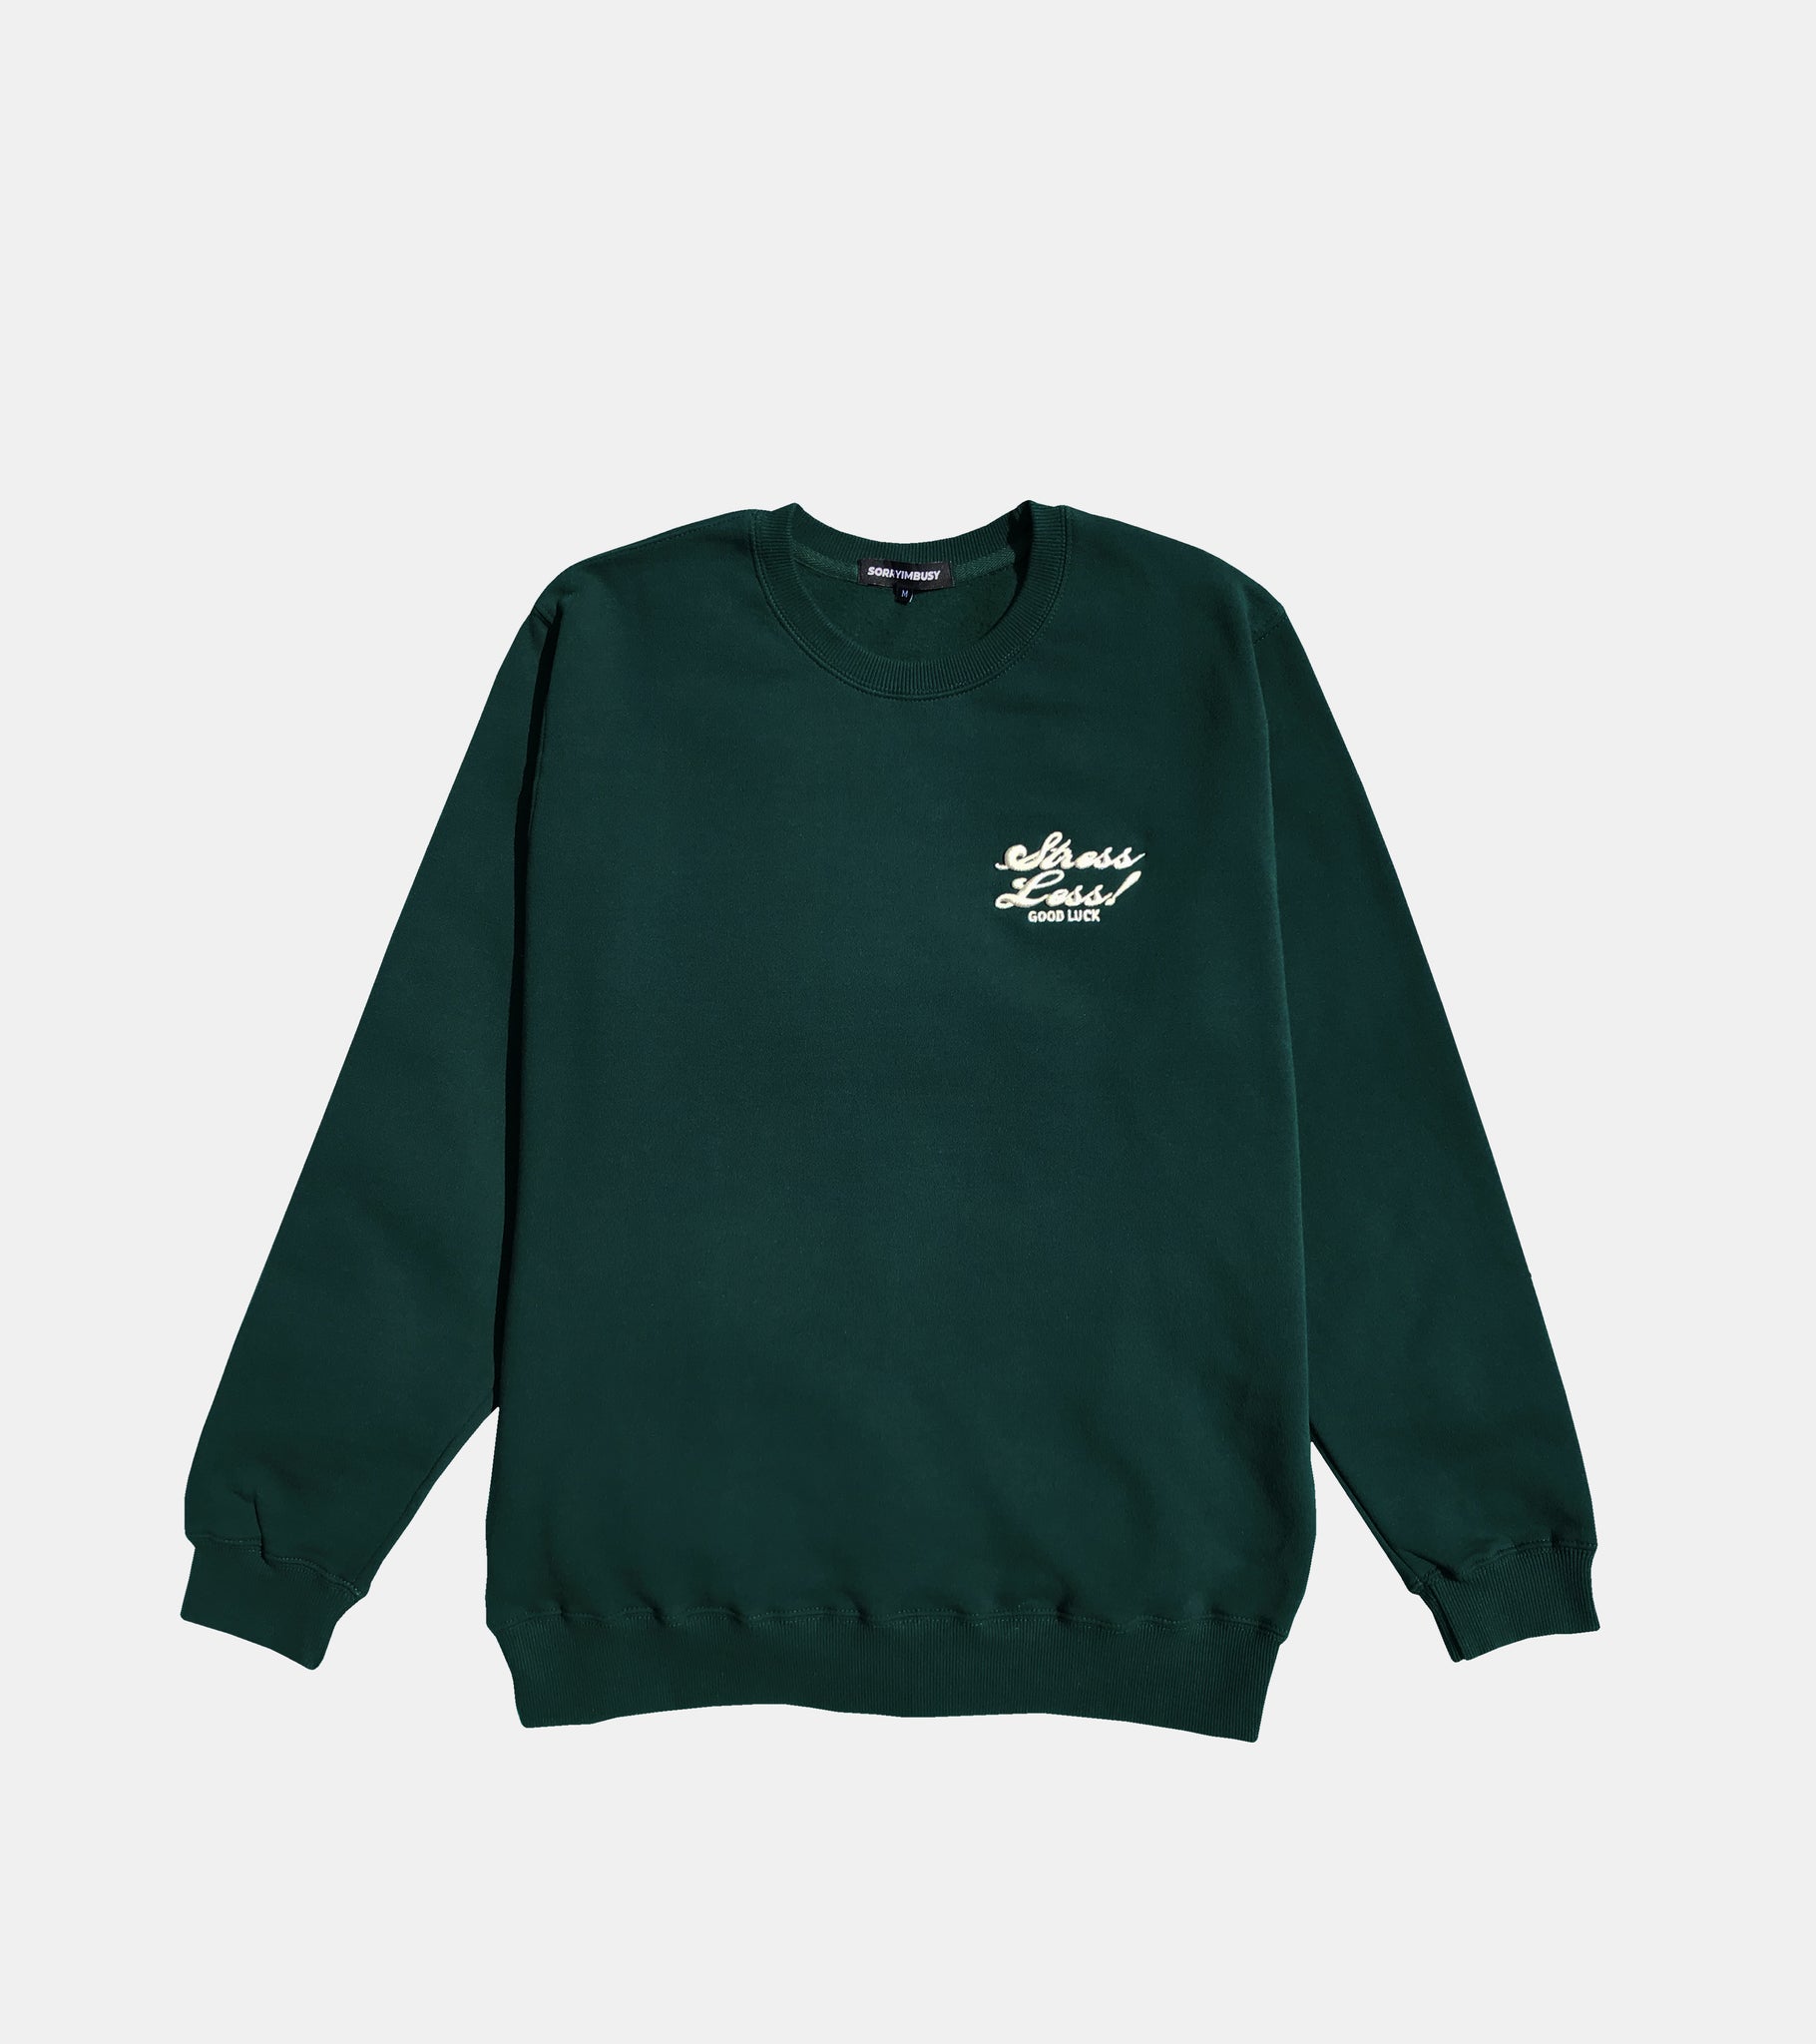 STRESS LESS CREWNECK FOREST GREEN BY SORRYIMBUSY